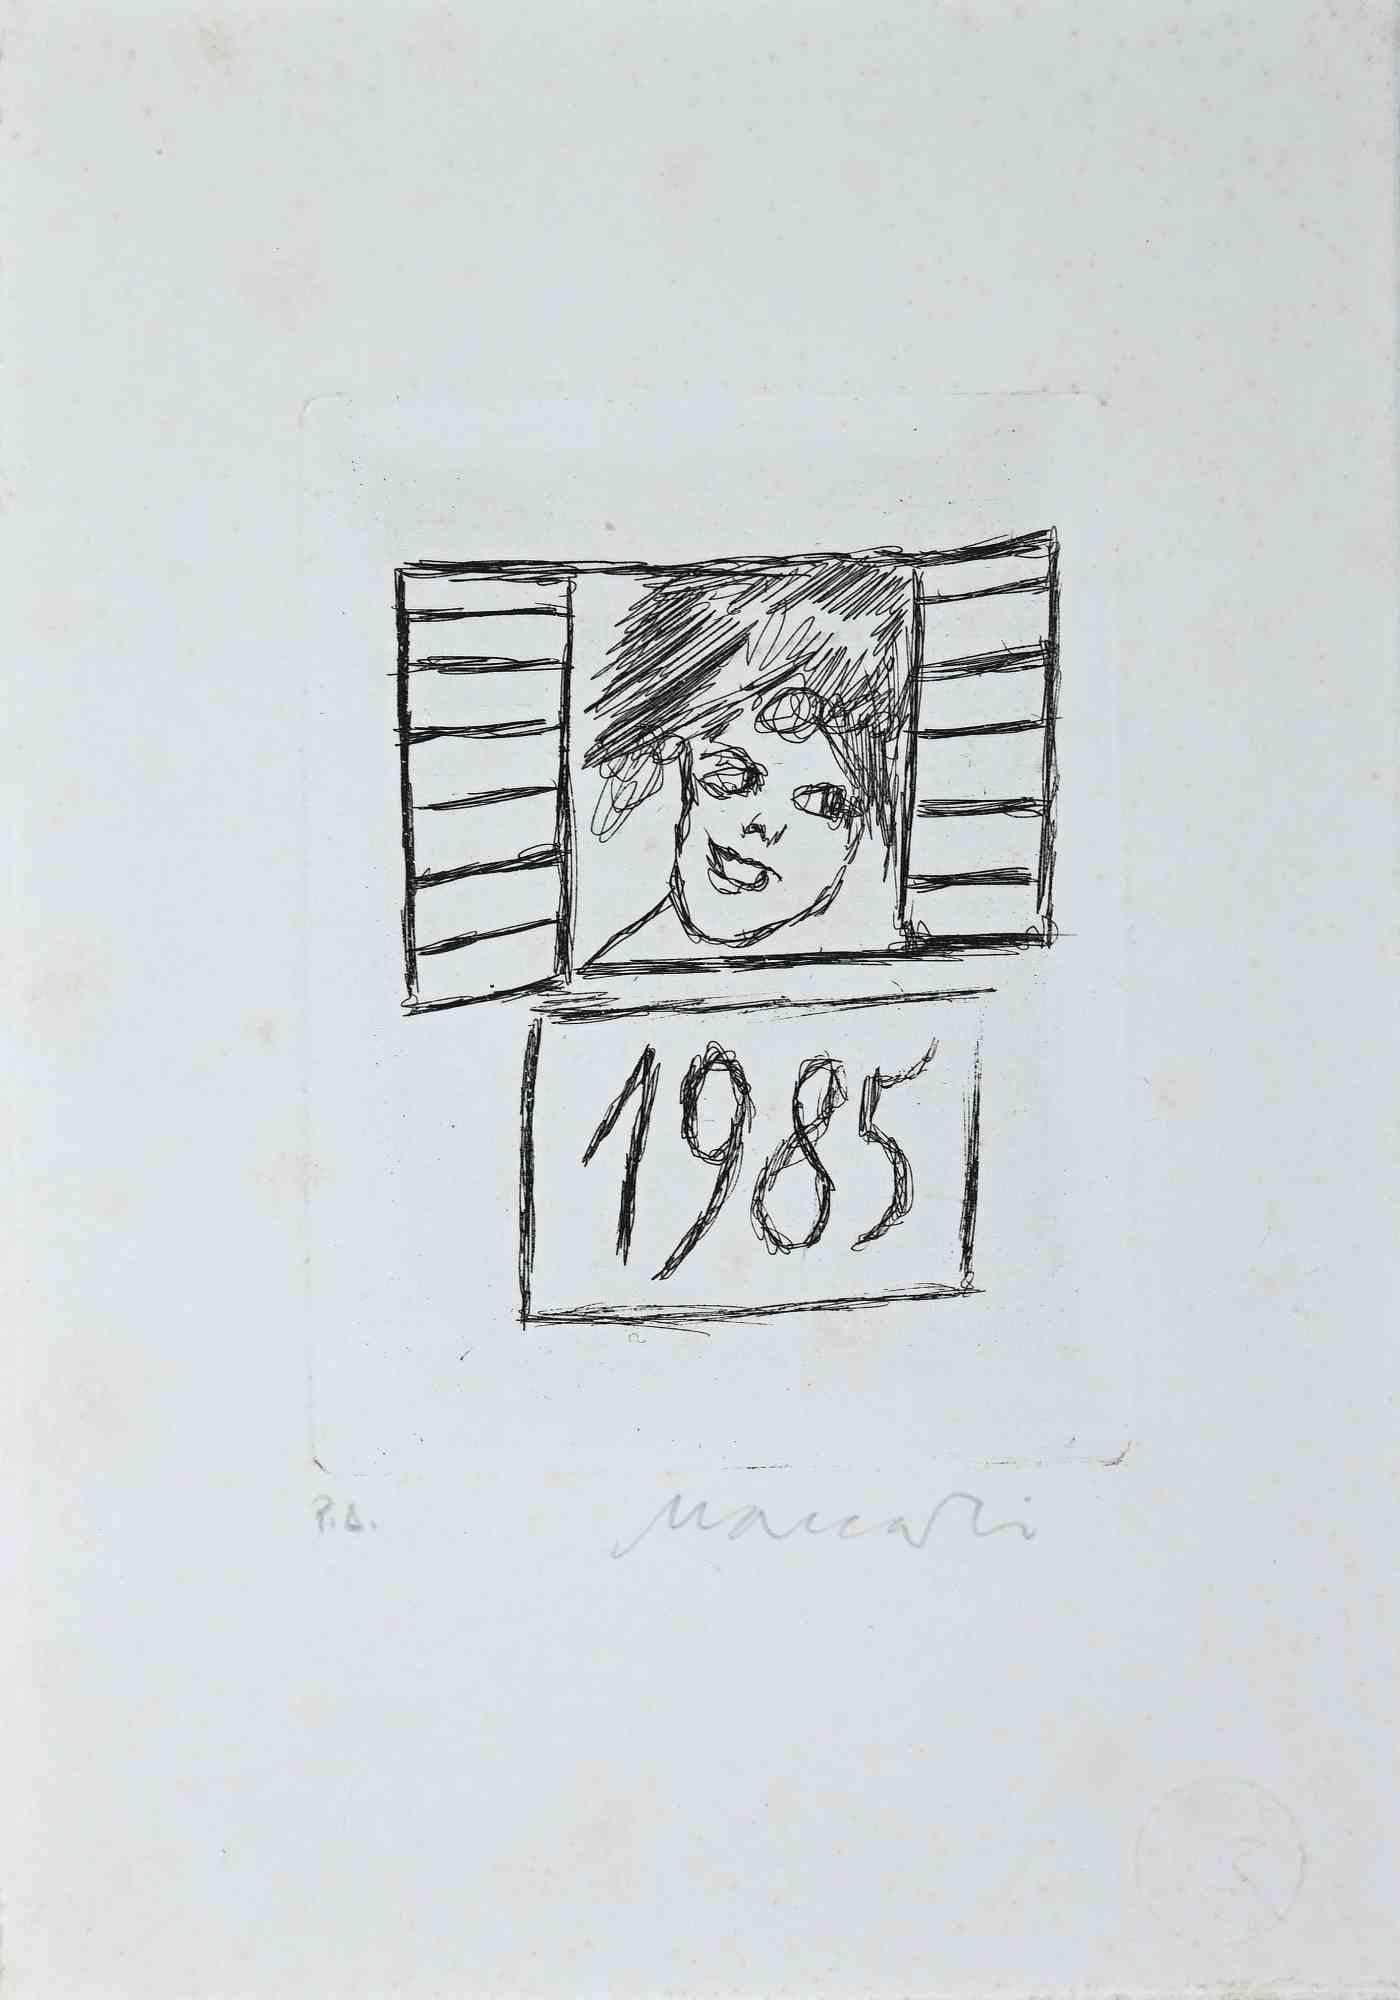 Happy 1985 is an original print realized by Mino Maccari in 1985.

Beautiful black and white etching on ivory-colored paper. 

Good condition on a yellowed paper.

Hand-signed by the artist with pencil.

Mino Maccari (1898-1989) was an Italian